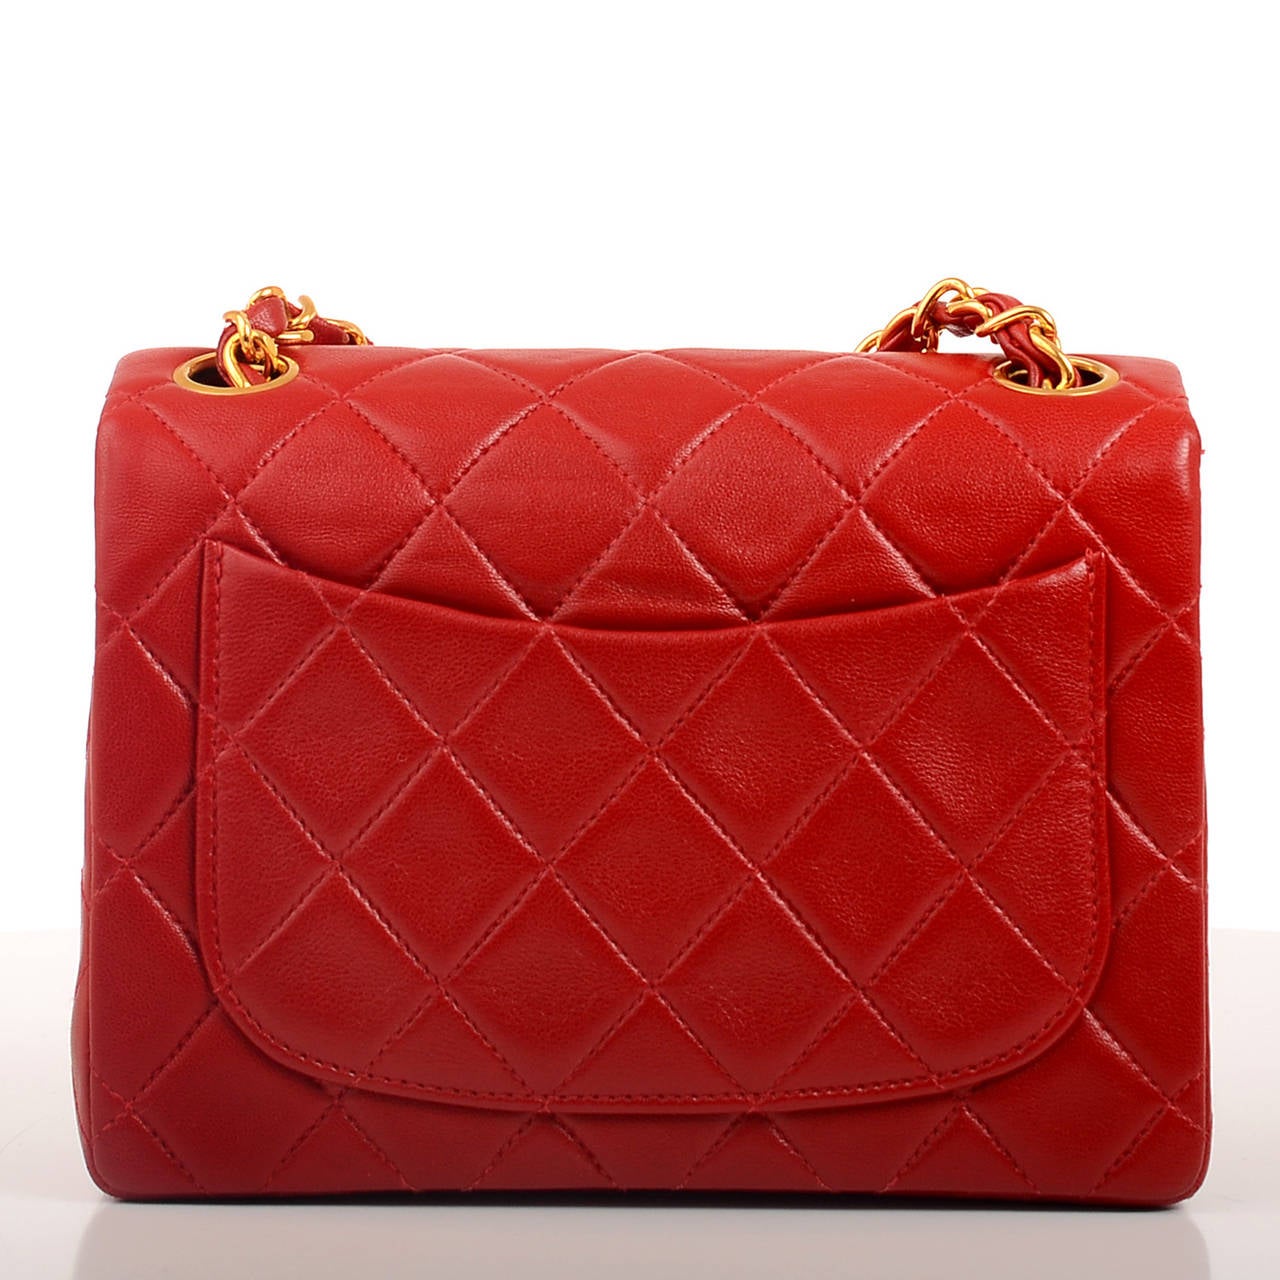 Chanel Vintage Red Quilted Lambskin Mini Classic Flap Bag In Excellent Condition For Sale In New York, NY